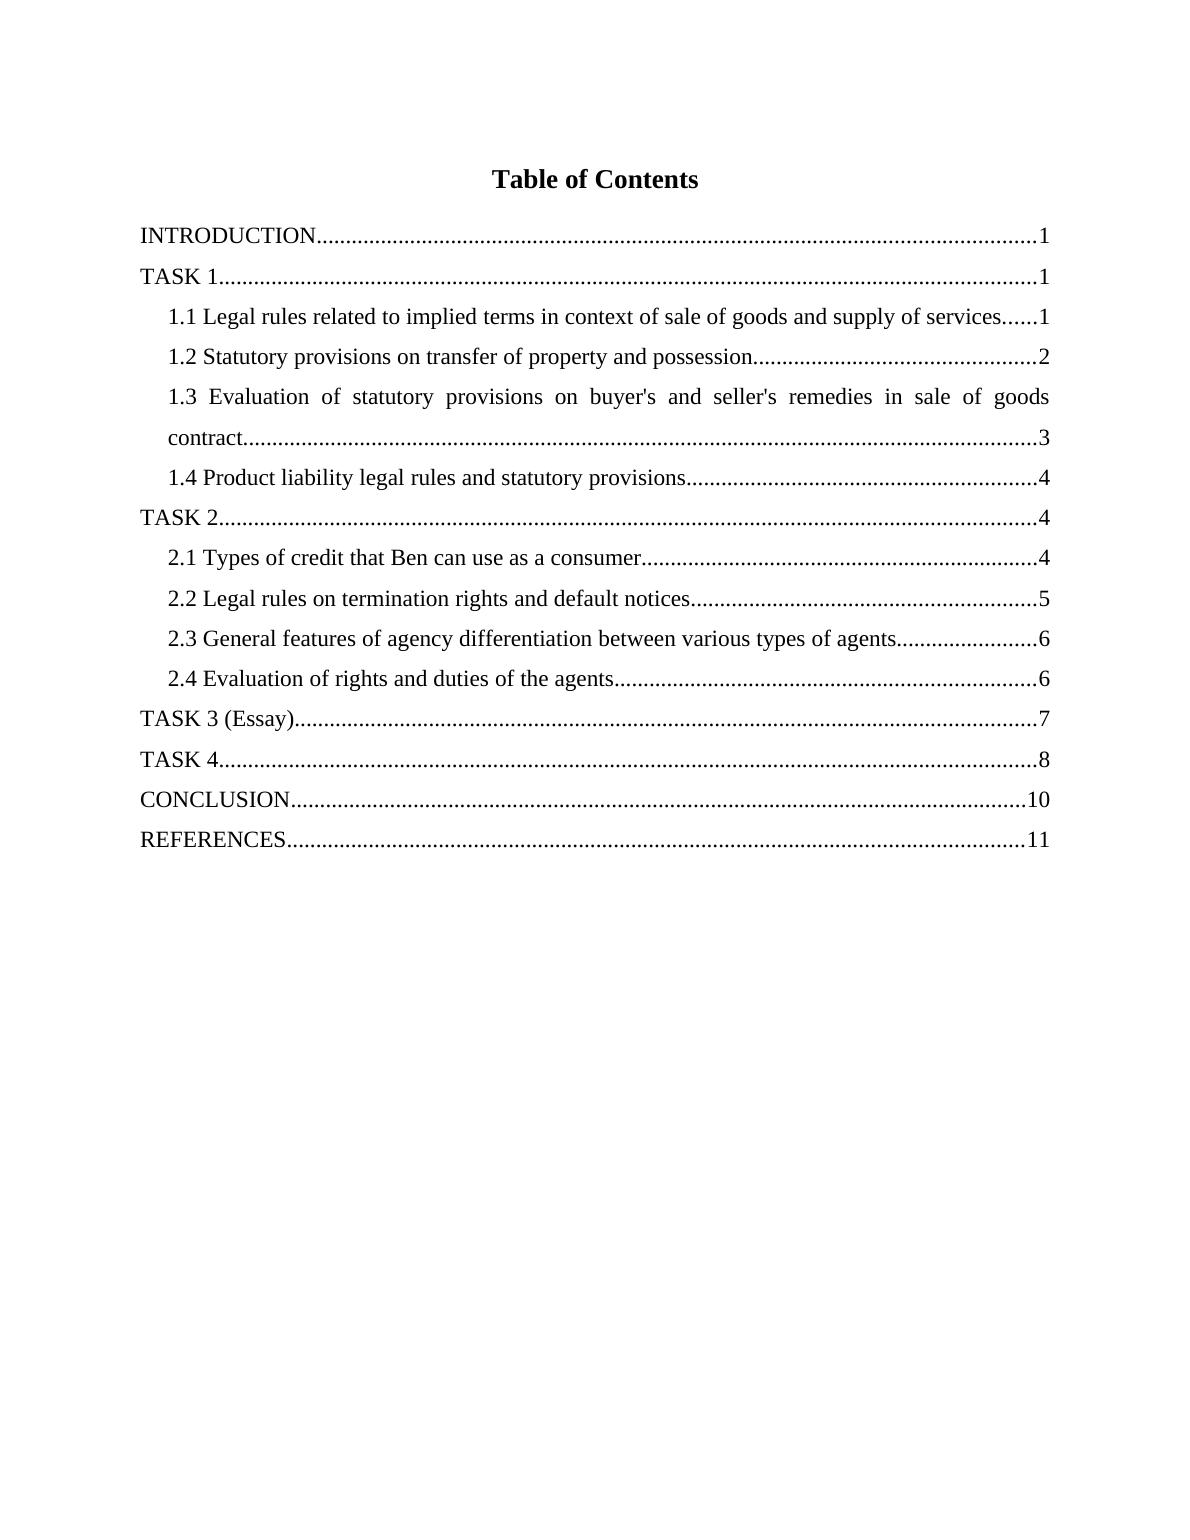 Report on Business Law_2